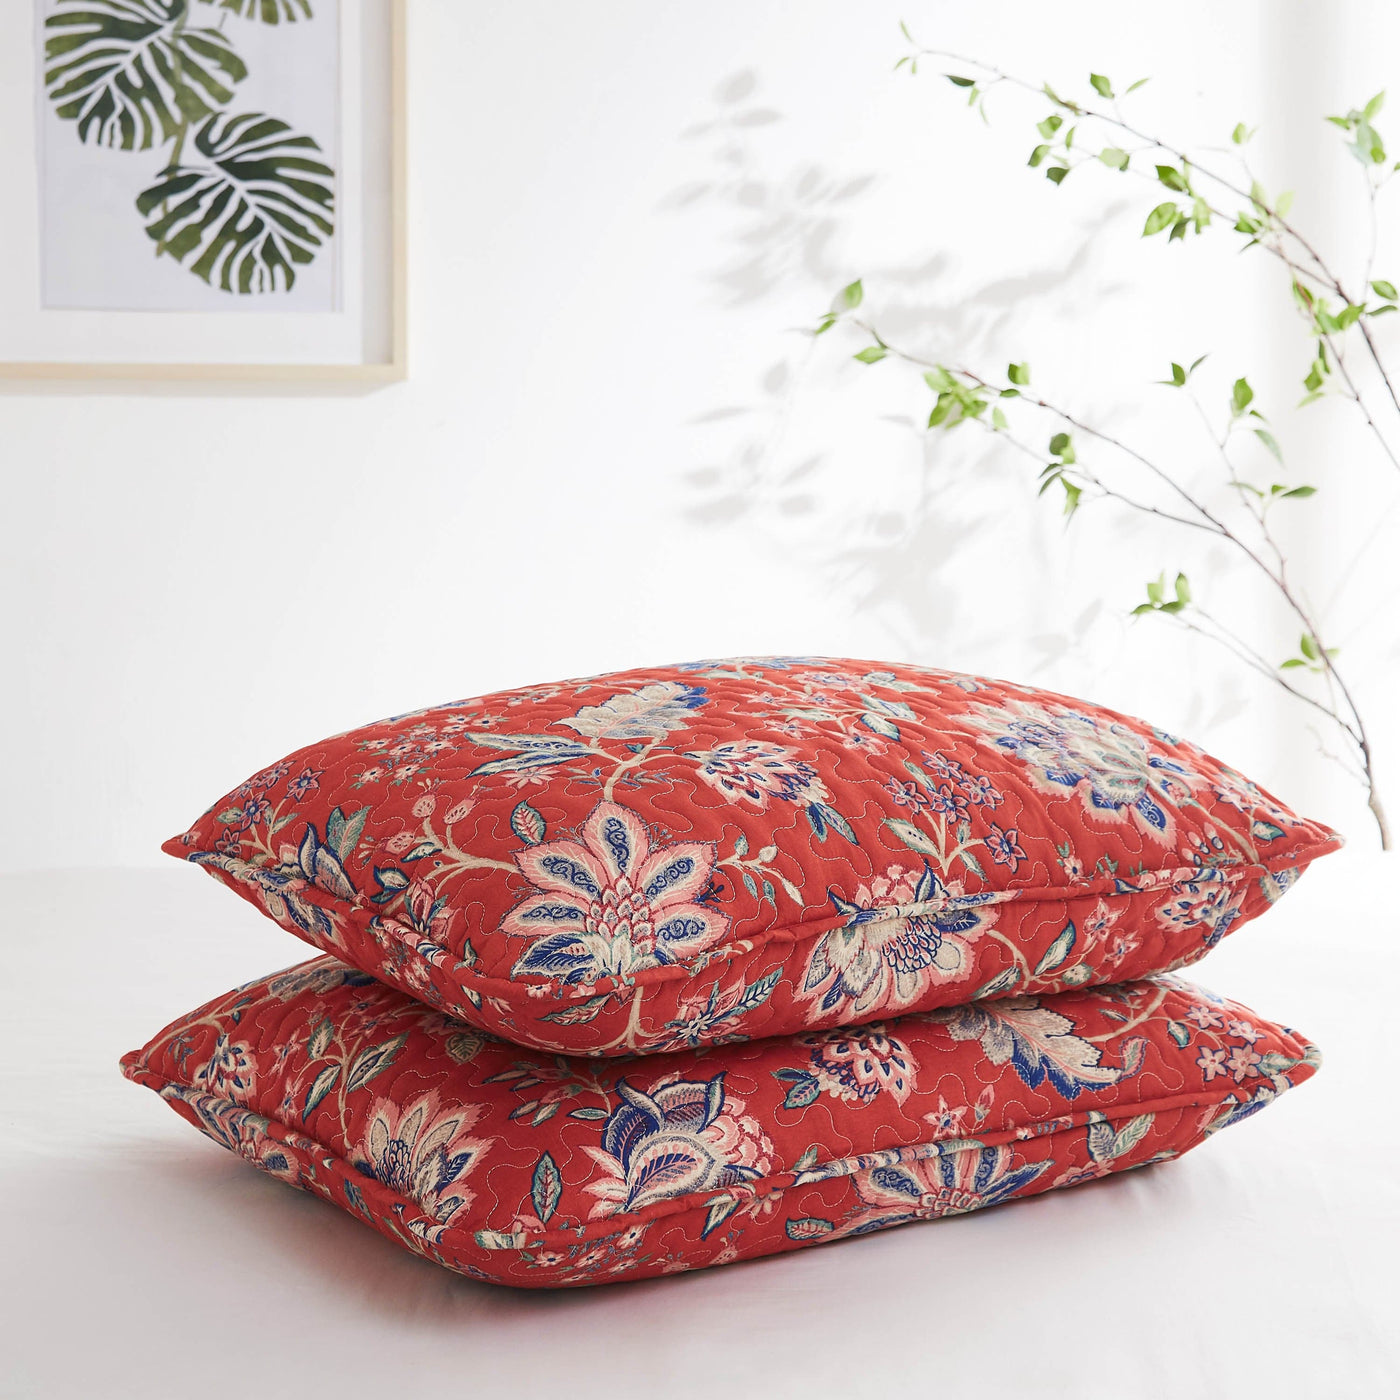 Stack Image of Jacobean Willow Quilted Shams in Red #color_jacobean-willow-red